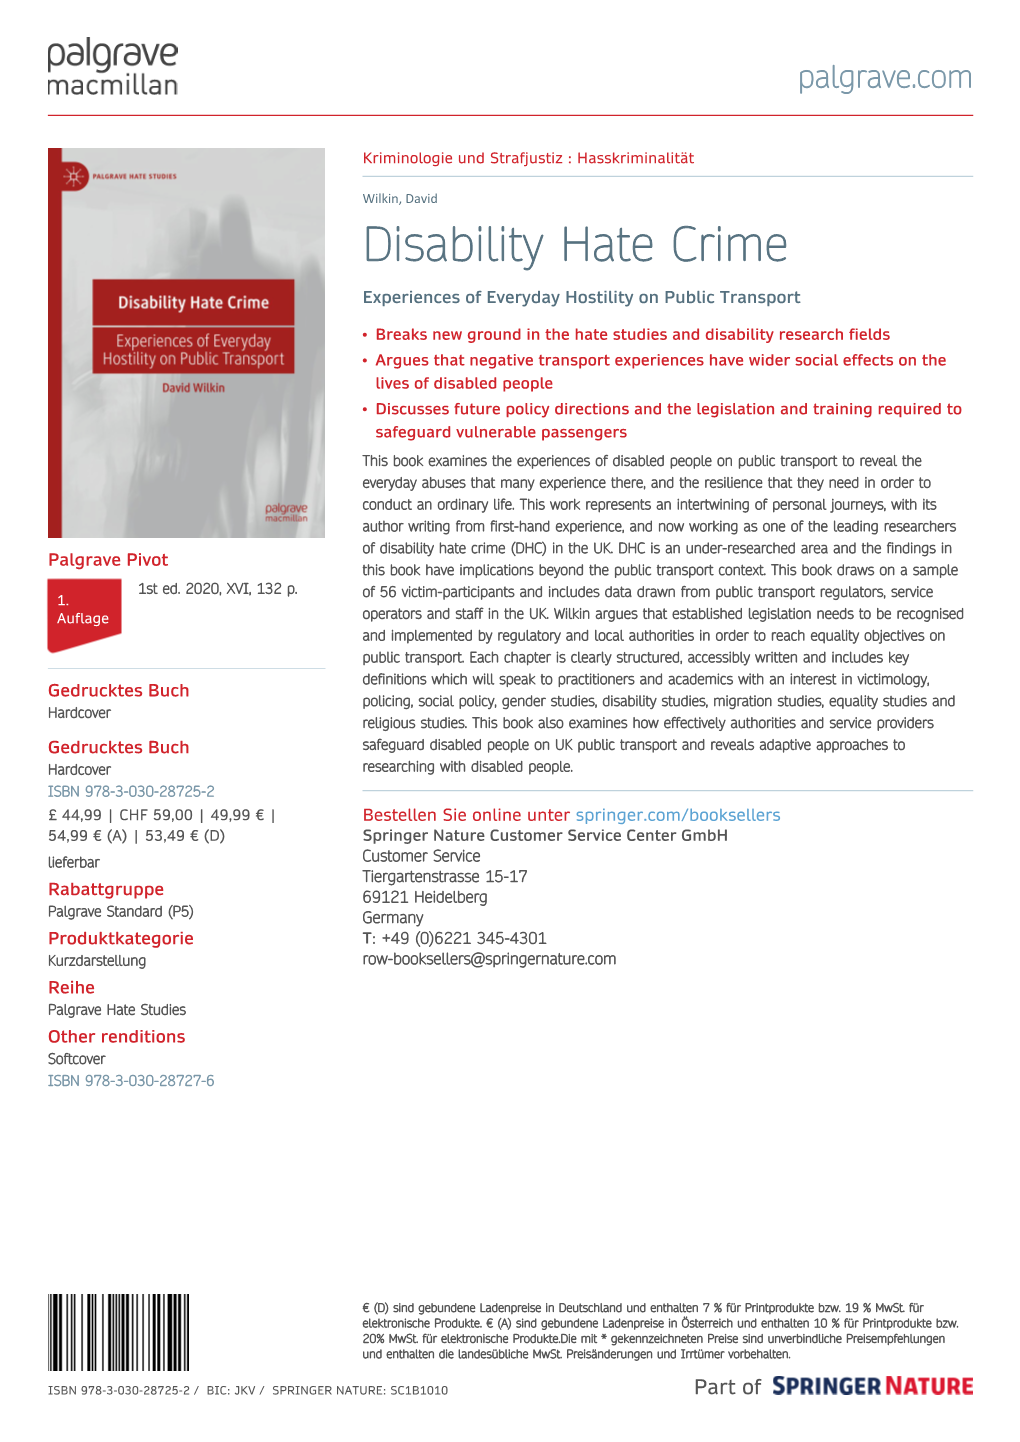 Disability Hate Crime Experiences of Everyday Hostility on Public Transport